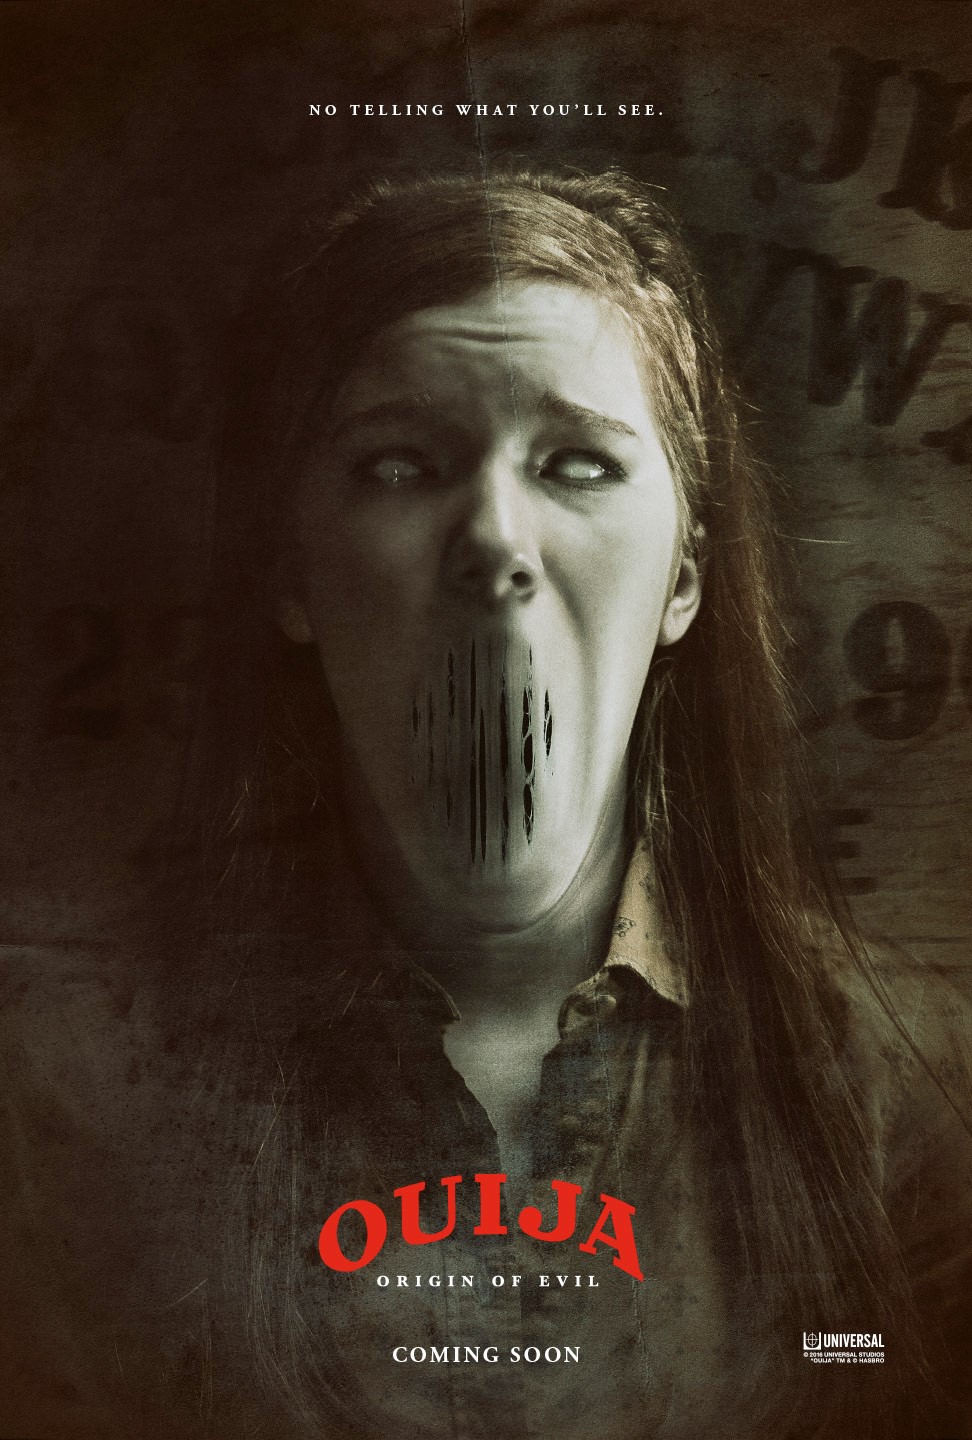 Ouija: Origin of Evil' Posters Talk to the Other Side - Bloody Disgusting